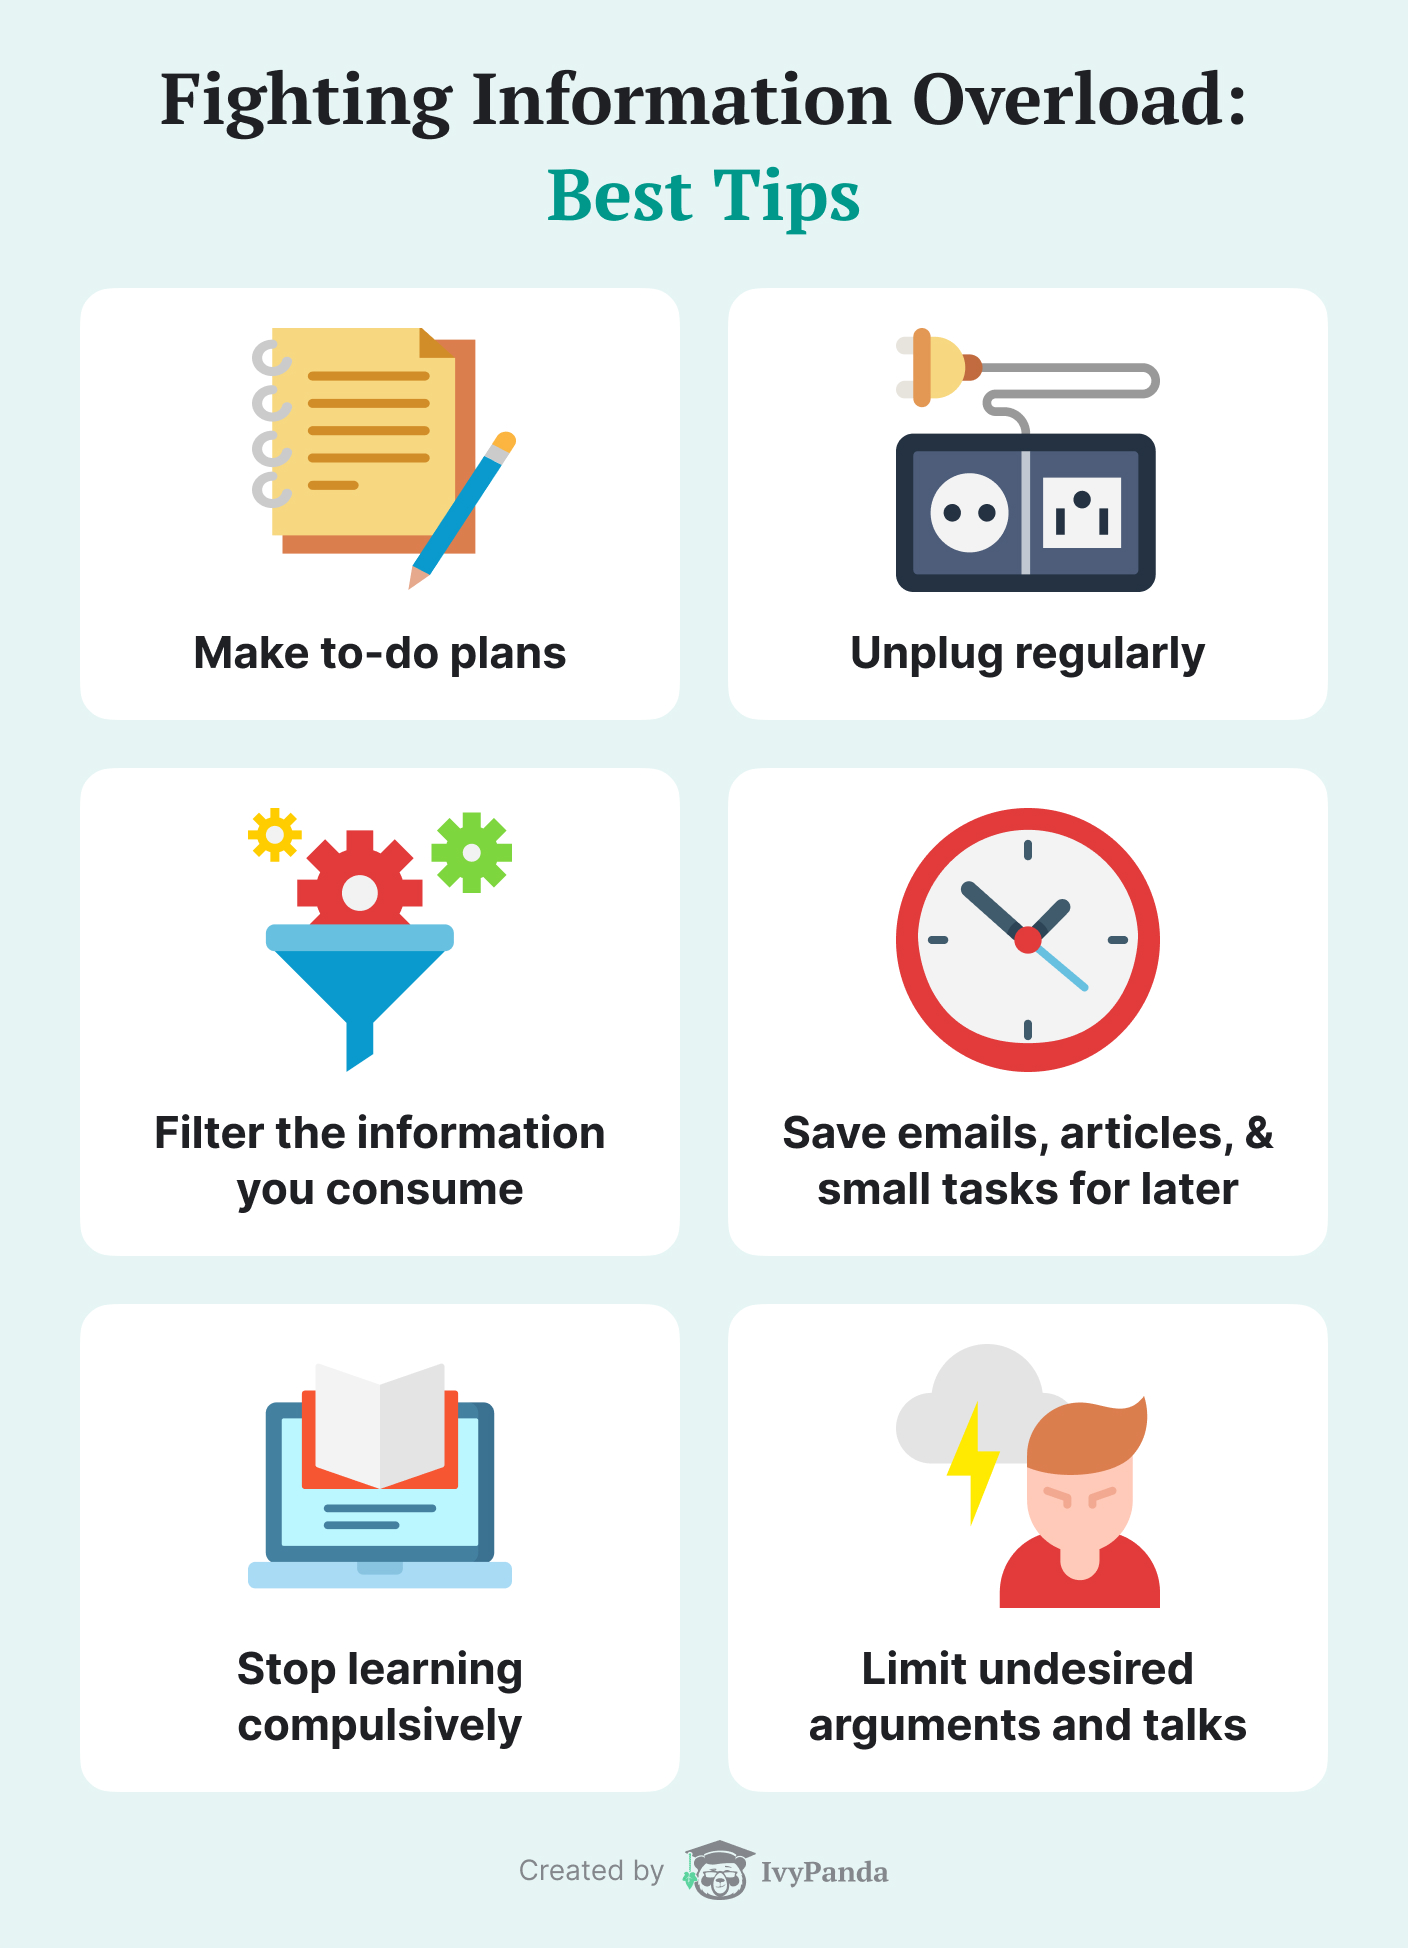 Tips on fighting information overload.